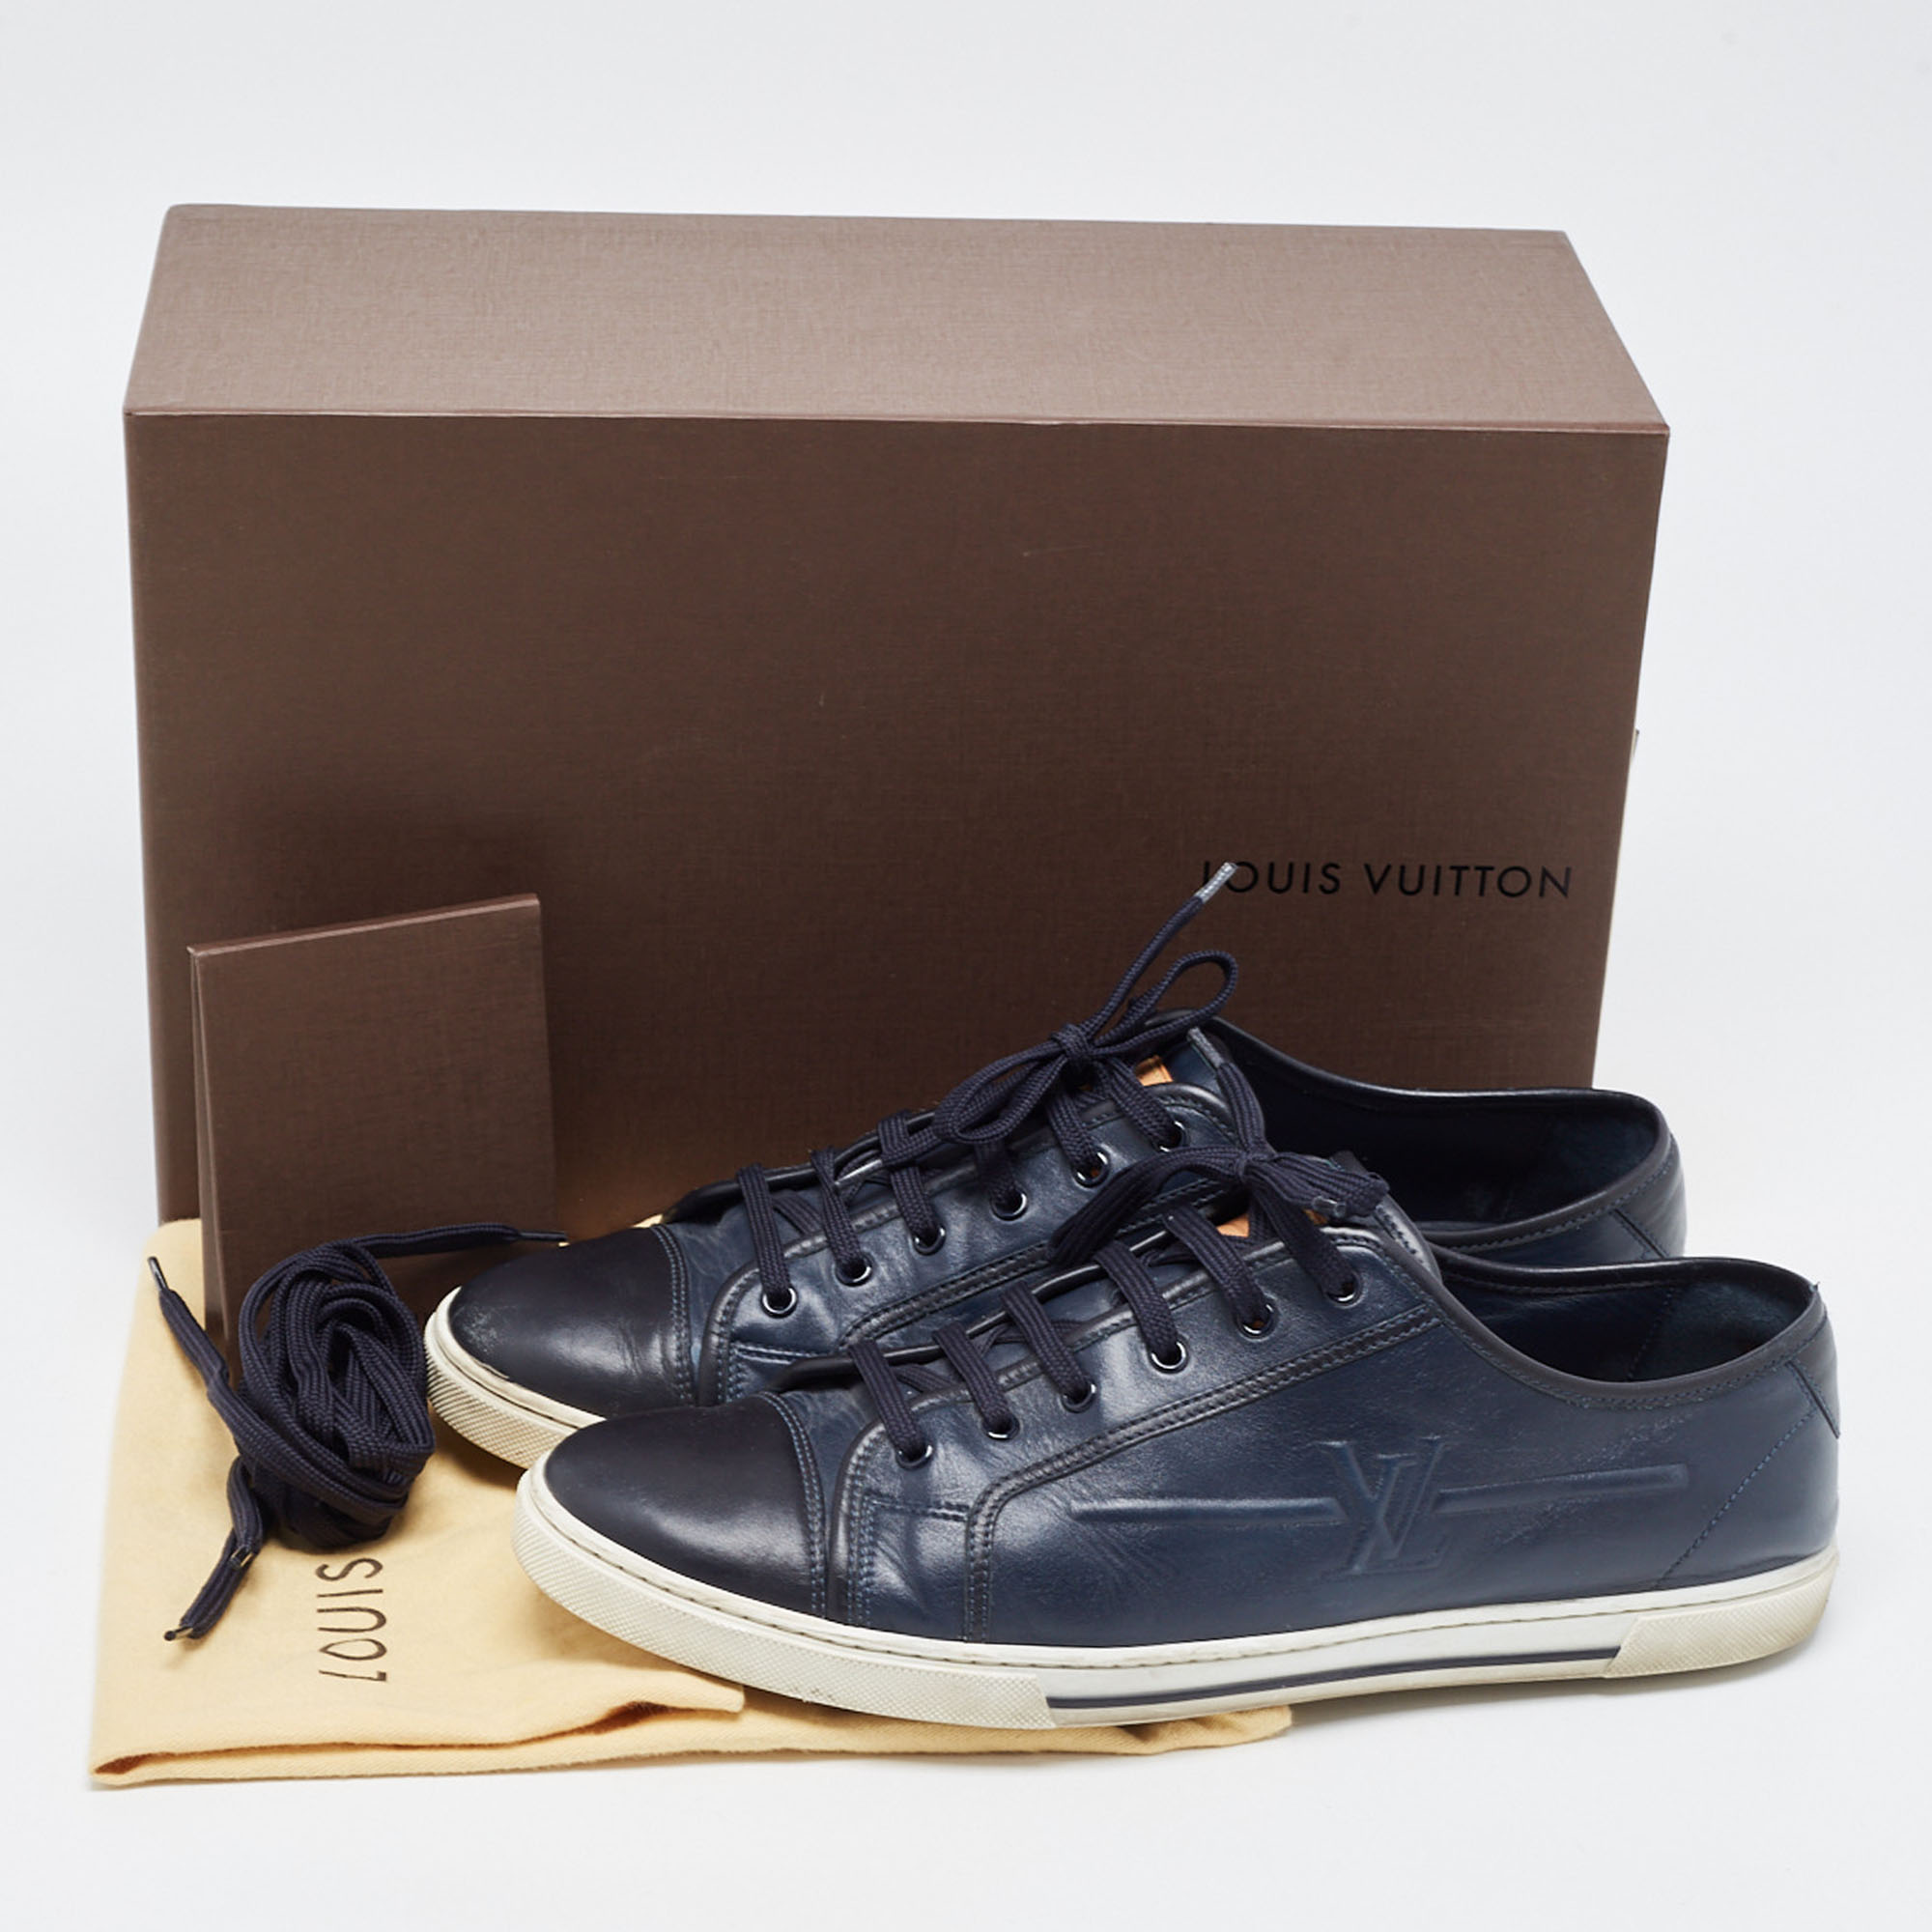 Louis Vuitton Navy Blue Leather Low Top Sneakers Size 43